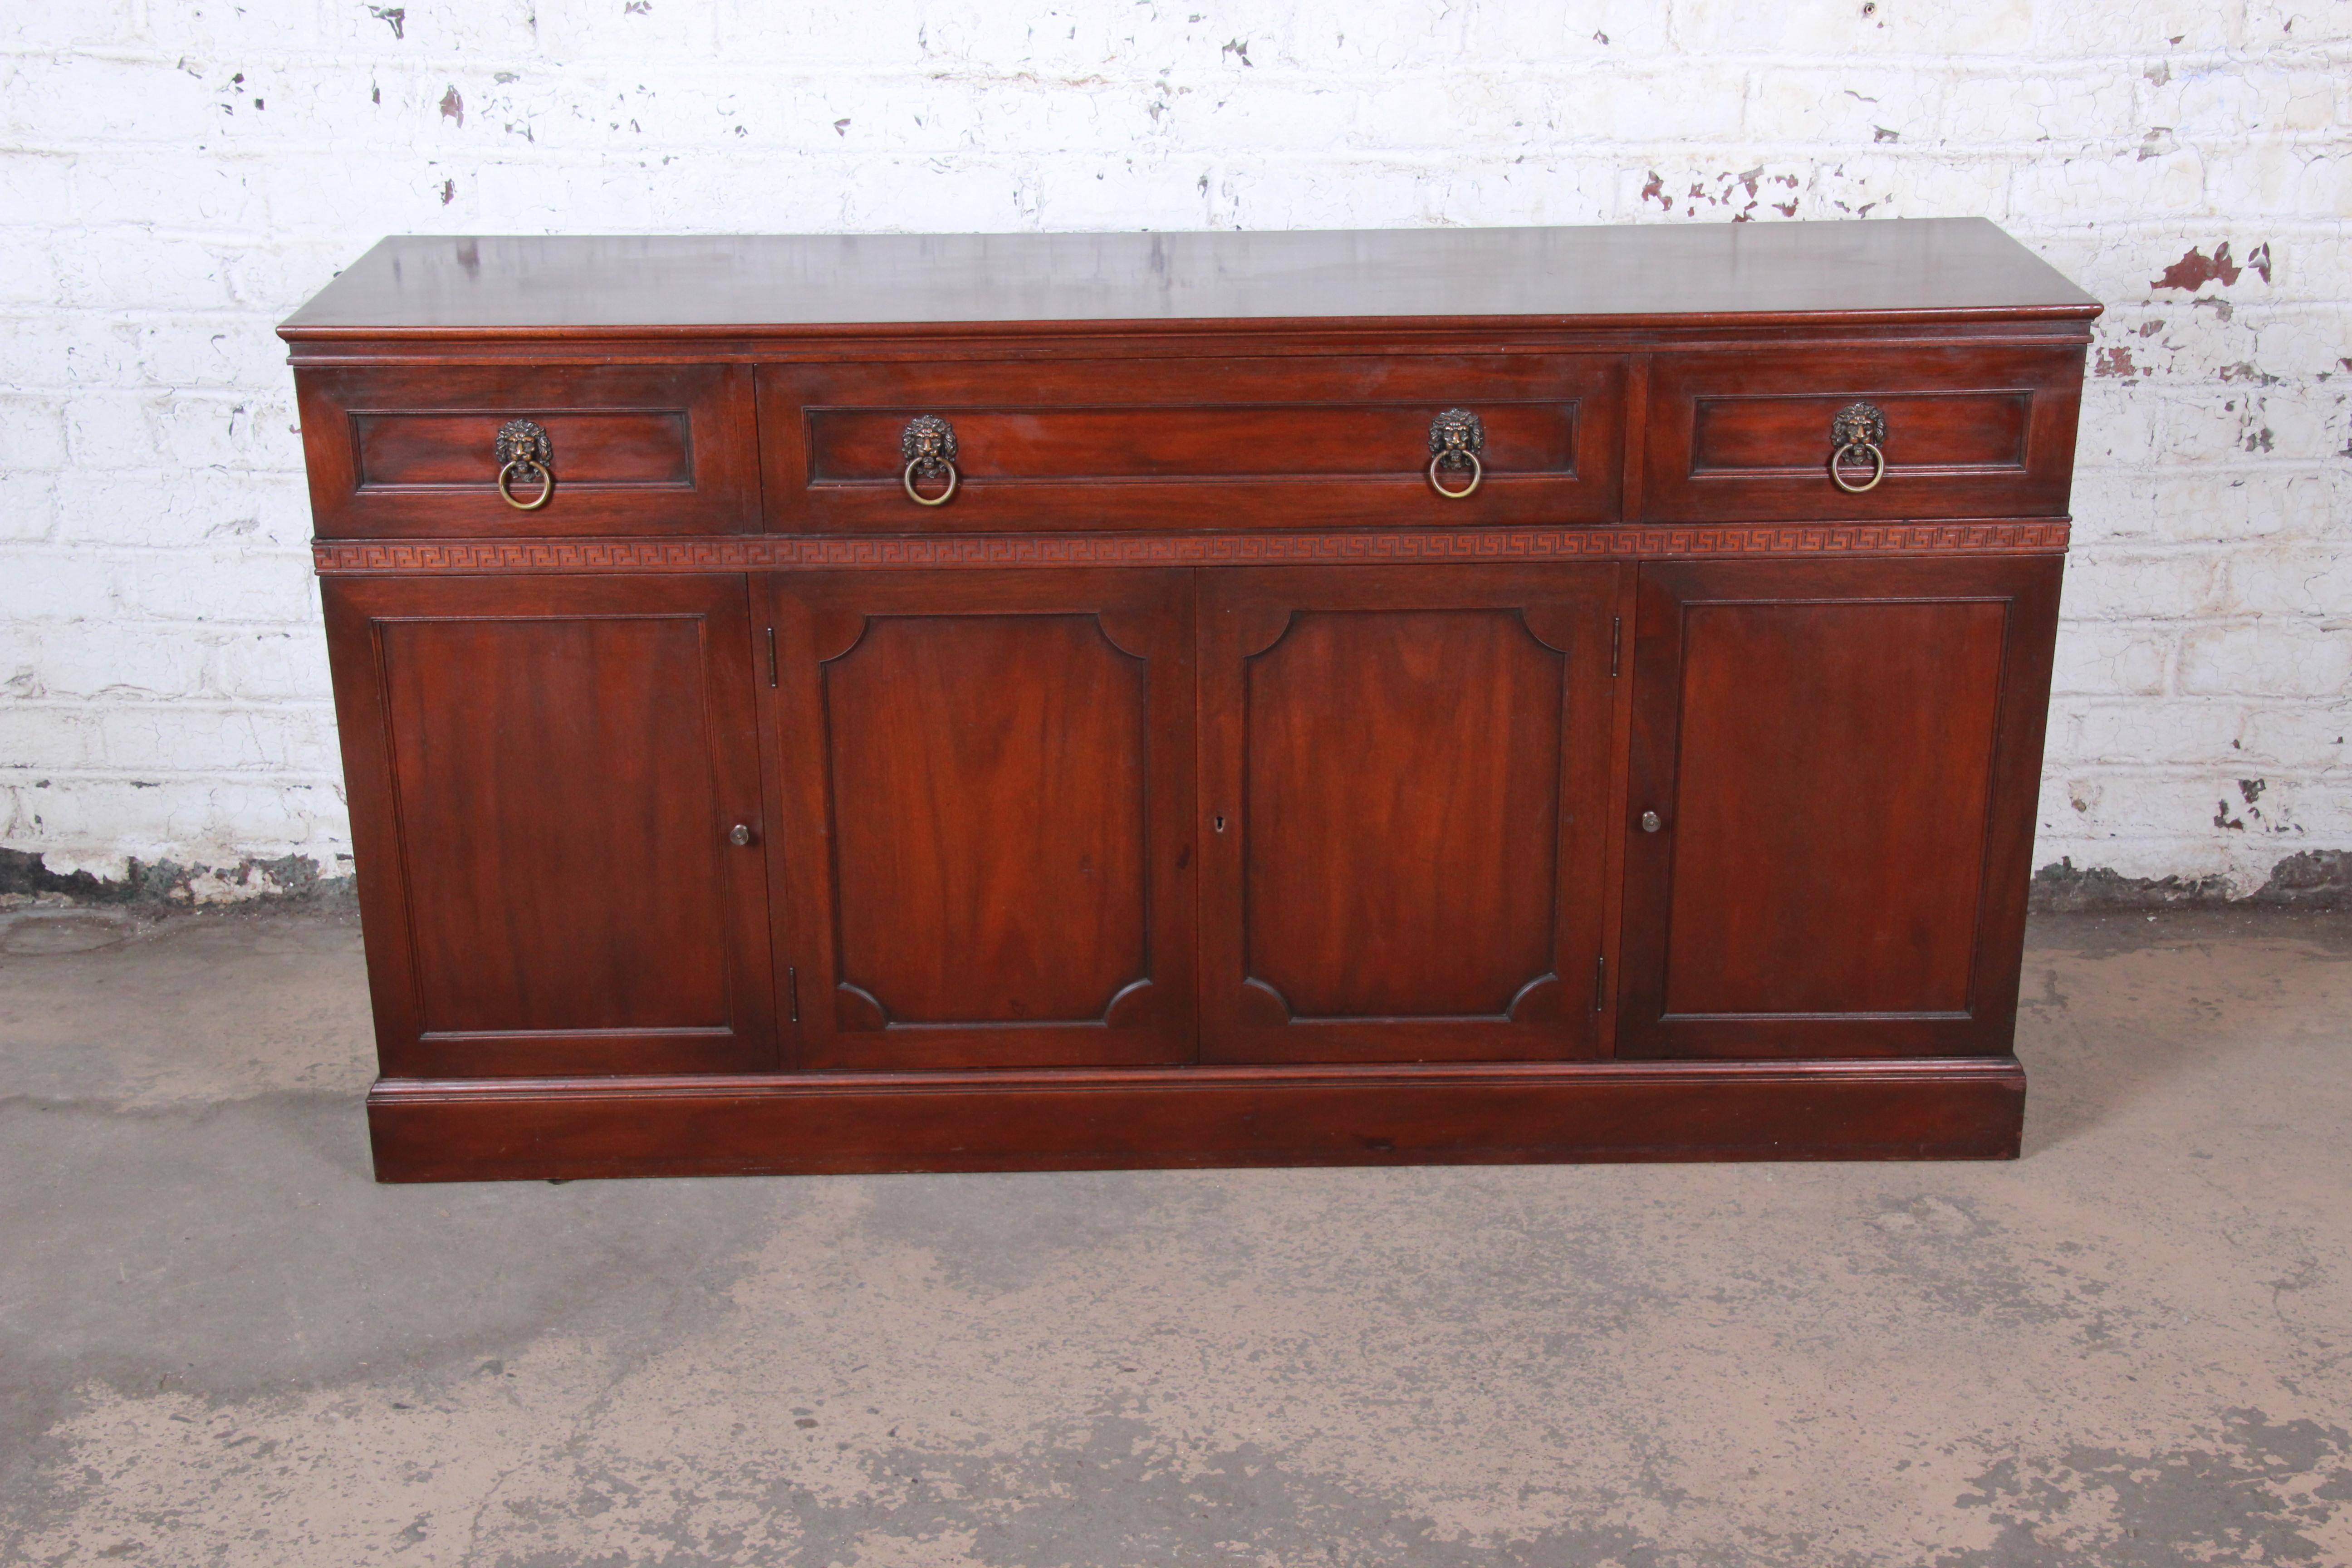 An exceptional carved mahogany Regency sideboard credenza or bar cabinet by Kittinger Furniture. The sideboard features gorgeous mahogany wood grain with a beautiful carved Greek Key design. It offers excellent storage, with three drawers at the top